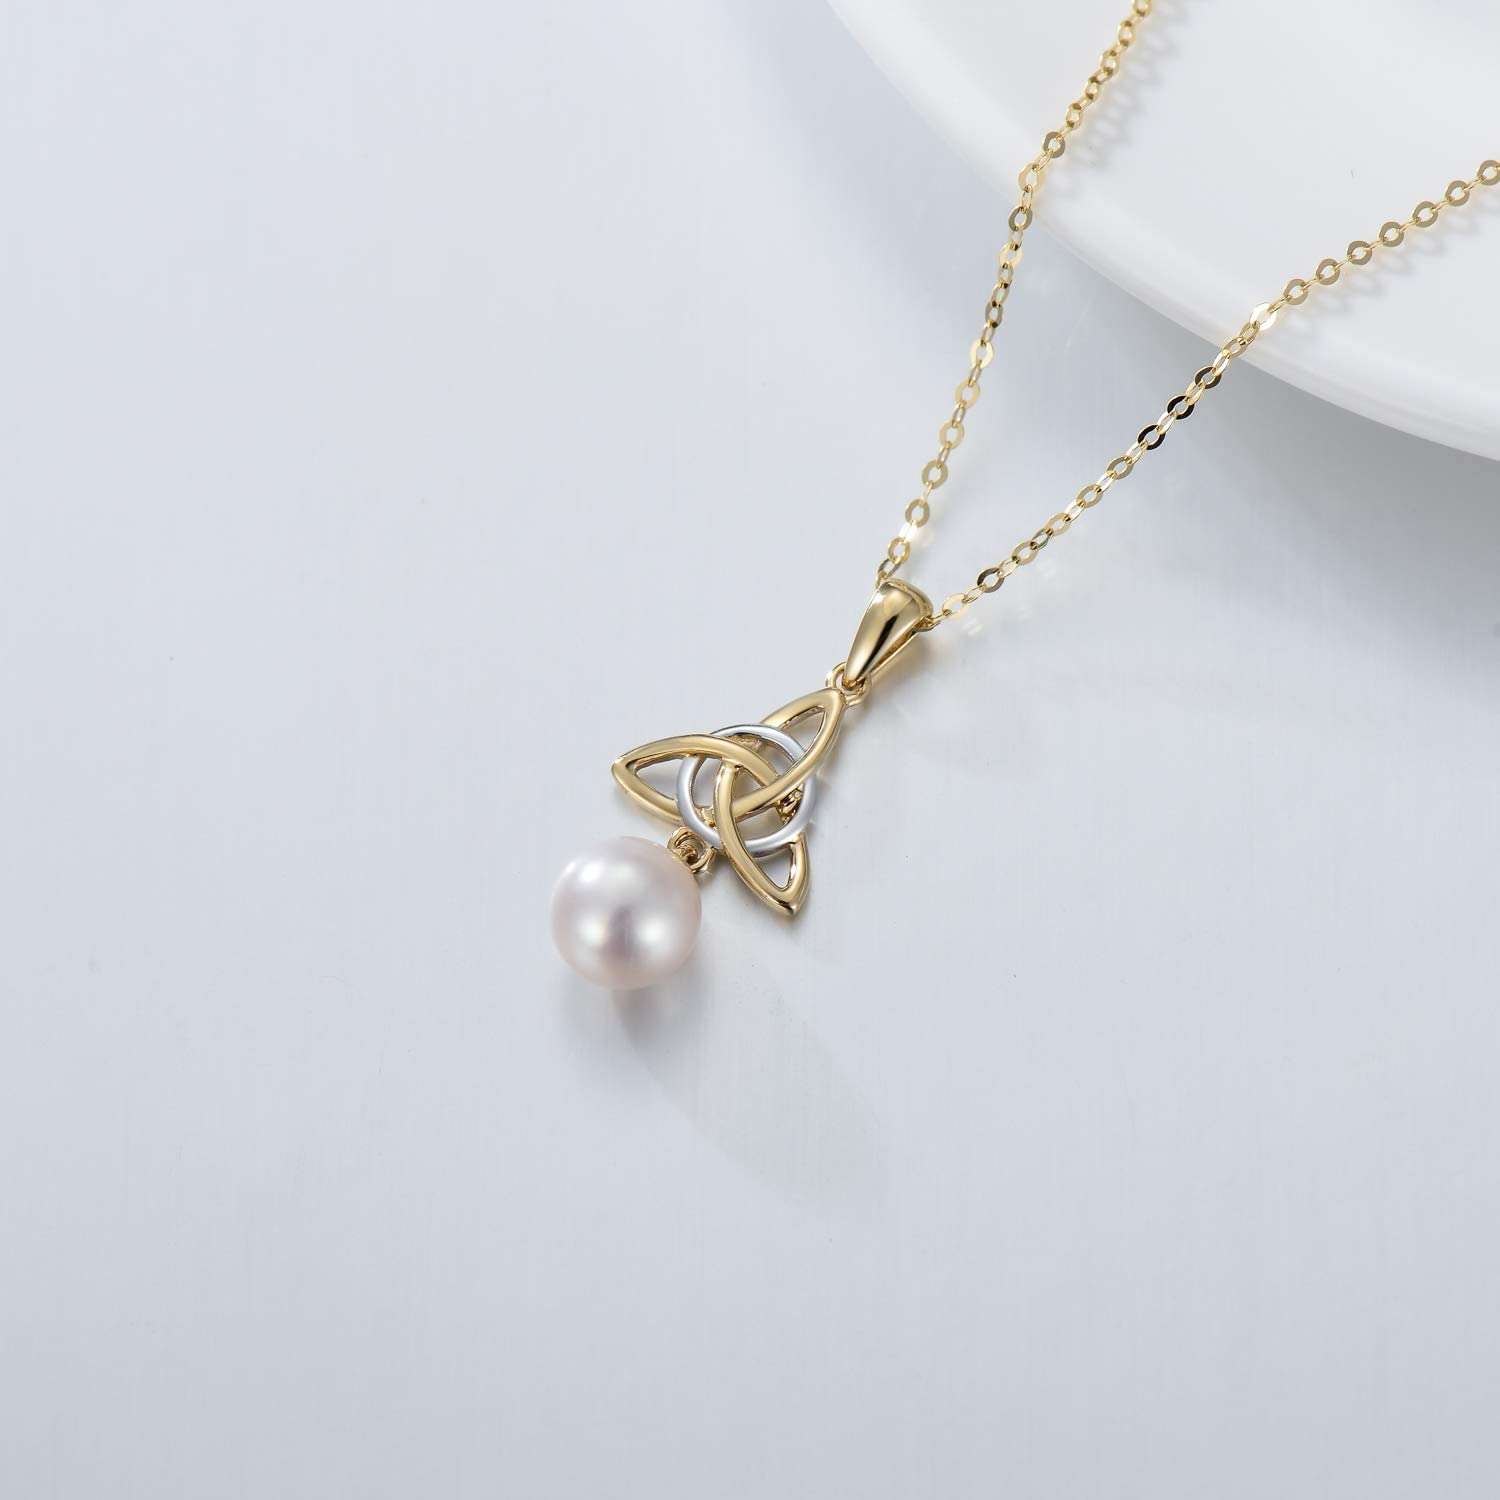 B08NDMQ7GF SISGEM 14K Solid Yellow Gold Good Luck Irish Celtic Knot  Necklace with Pearl,Trinity Knot Pendant Charm Necklace Christmas Birthday  Gift 